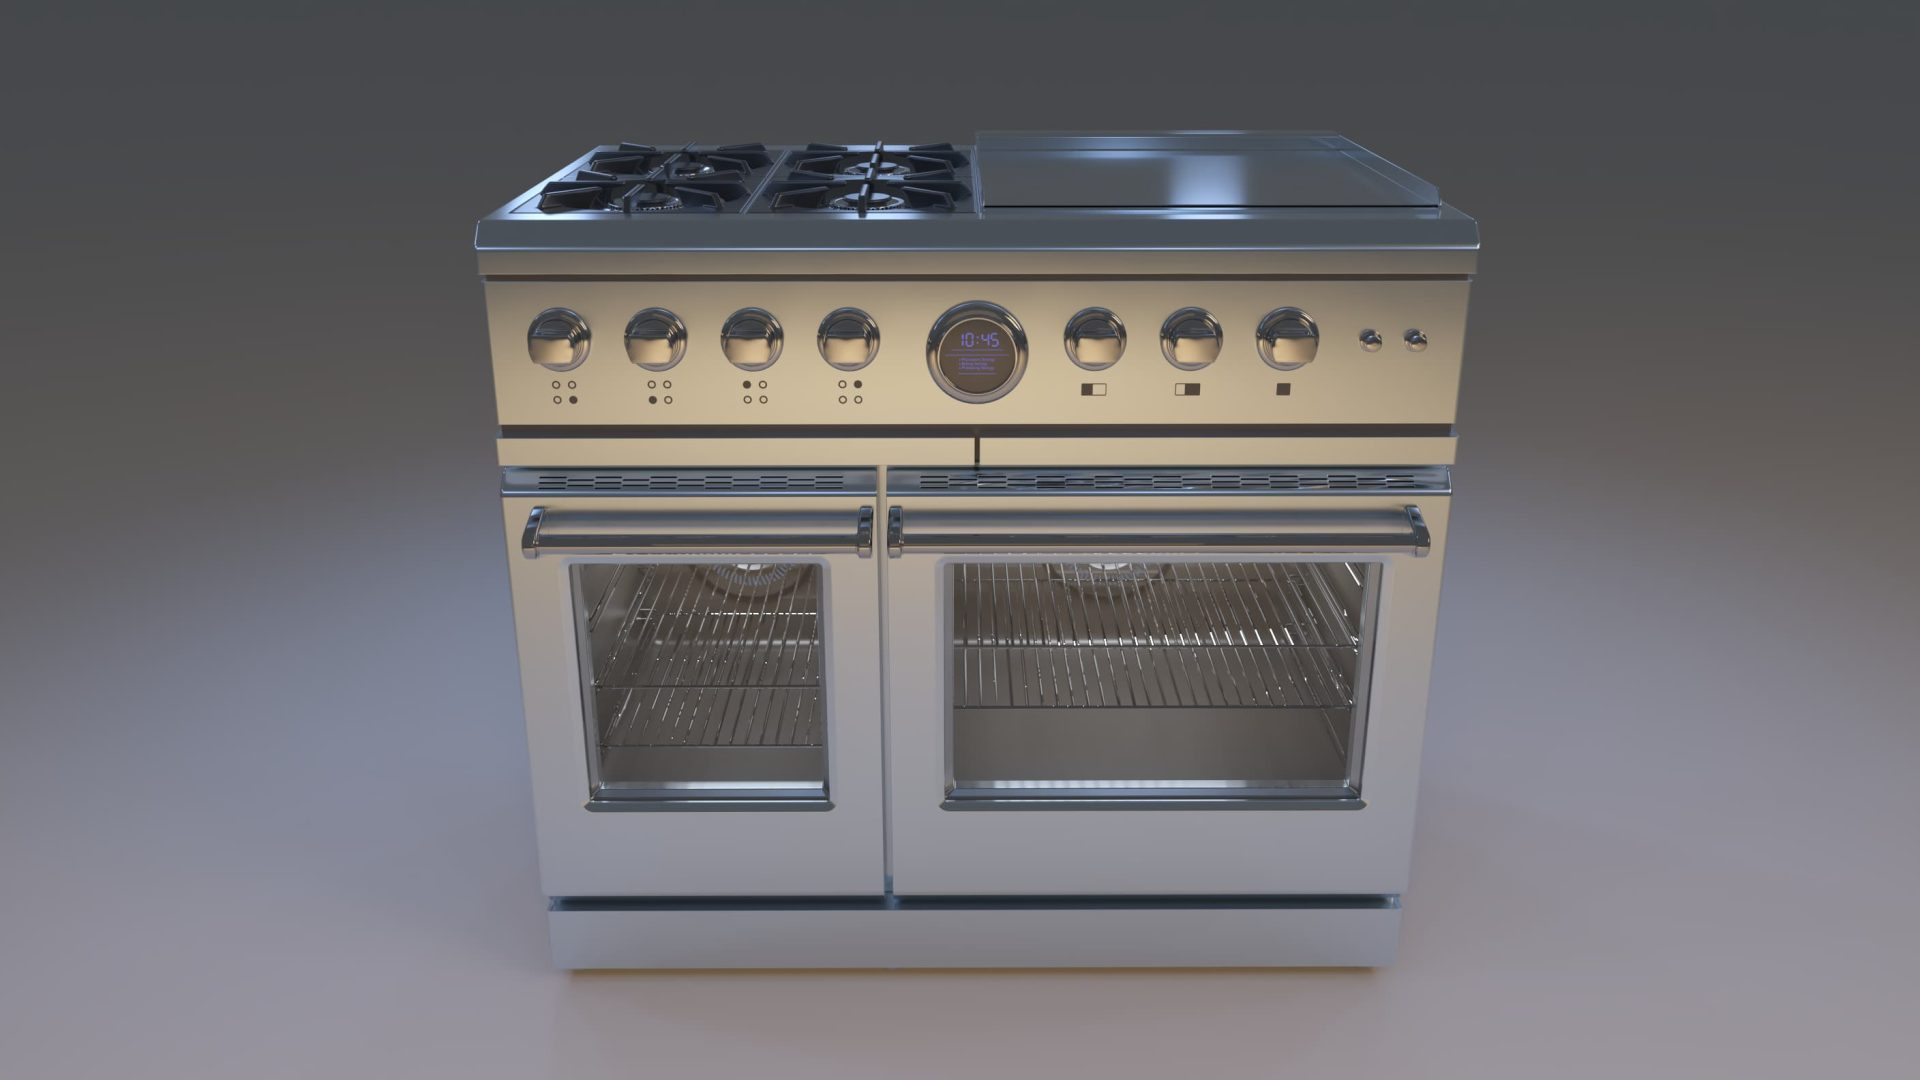 Product Render & Visualization of Dishwasher another angle